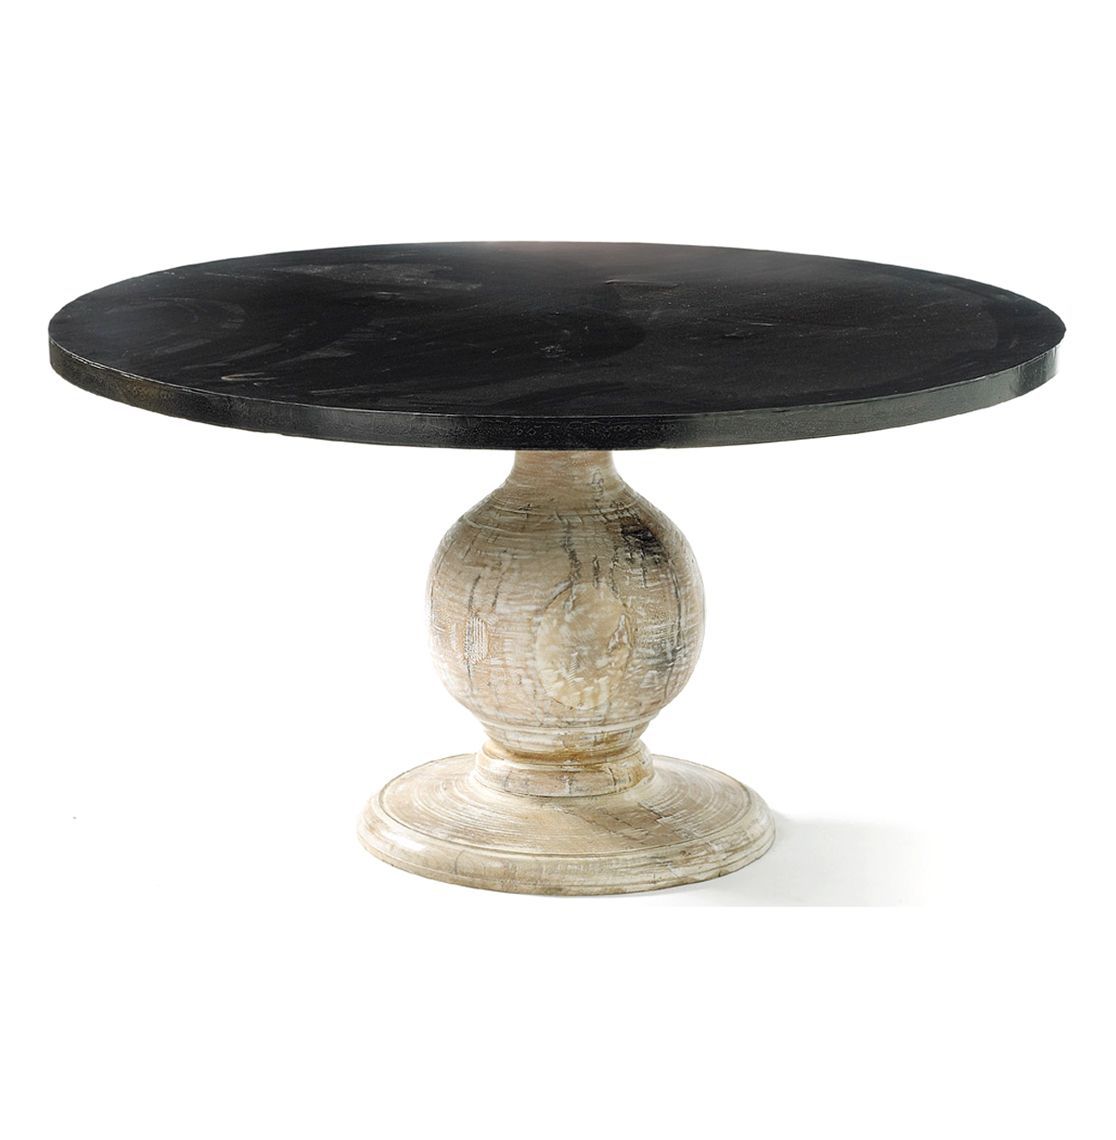 Enchanting 54 Inch Round Pedestal Table Country Classics Inside Best And Newest Nolan Round Pedestal Dining Tables (View 11 of 25)